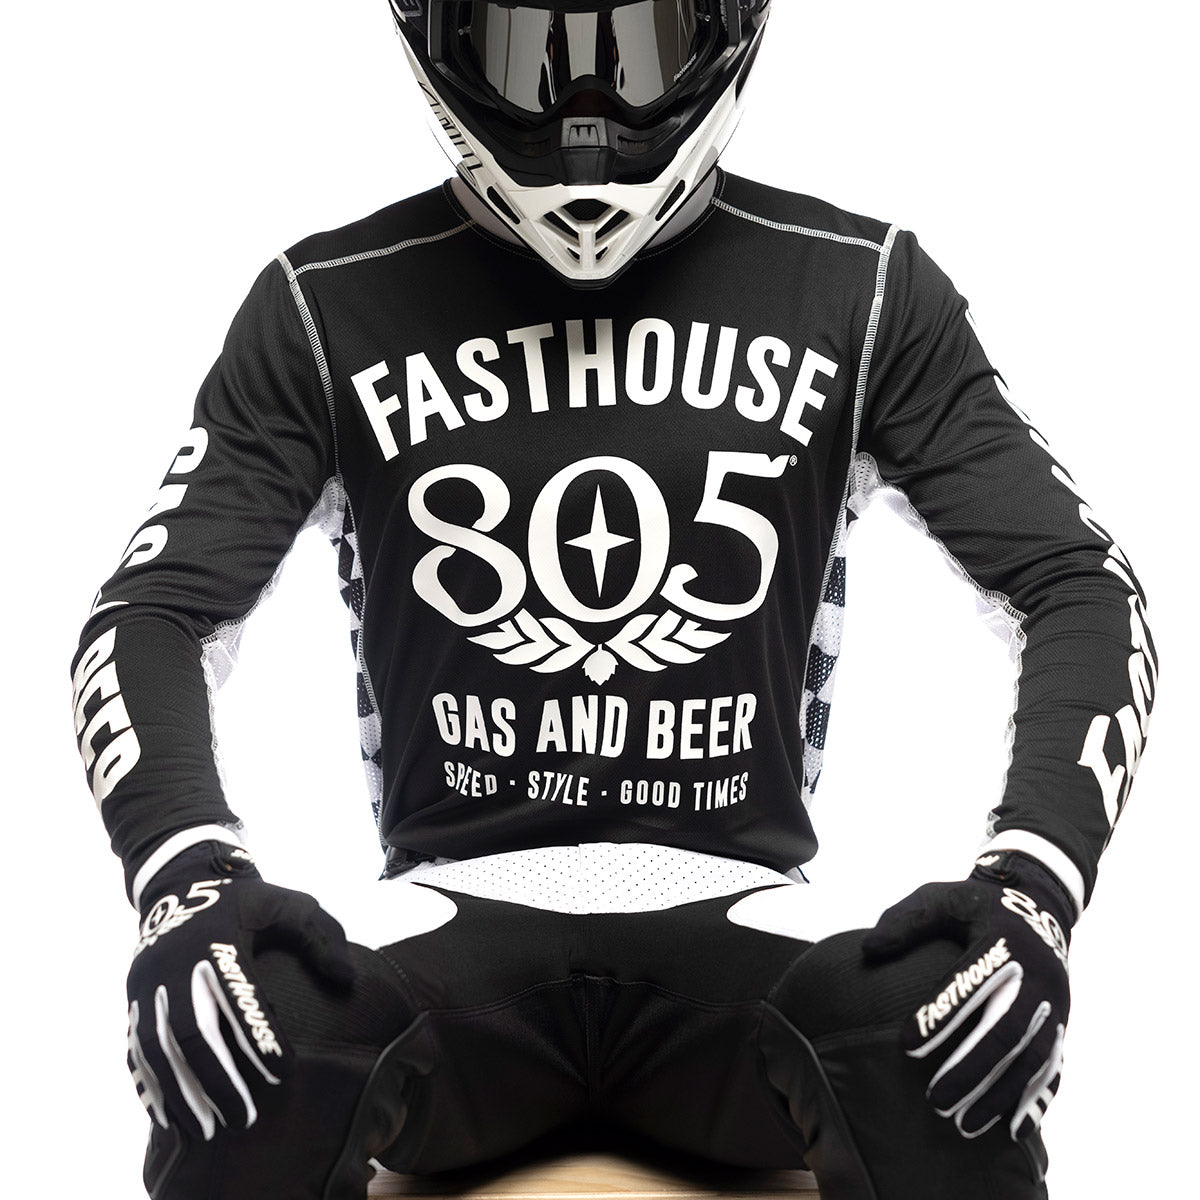 Fasthouse Off-Road Jersey - Black/White L